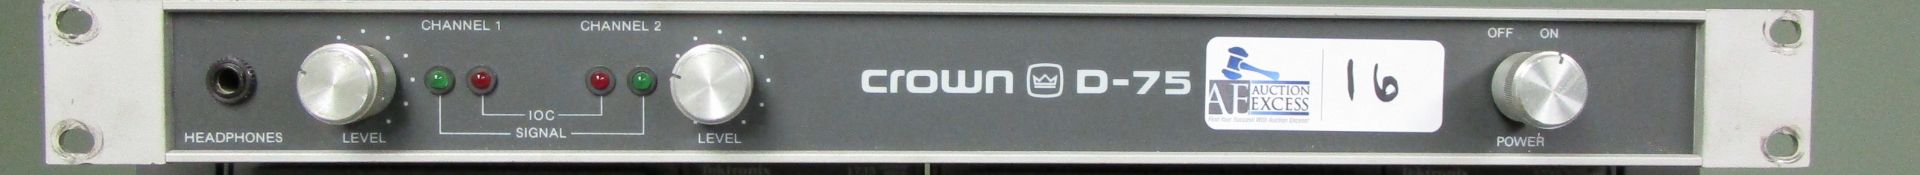 CROWN D-75 STEREO AMP